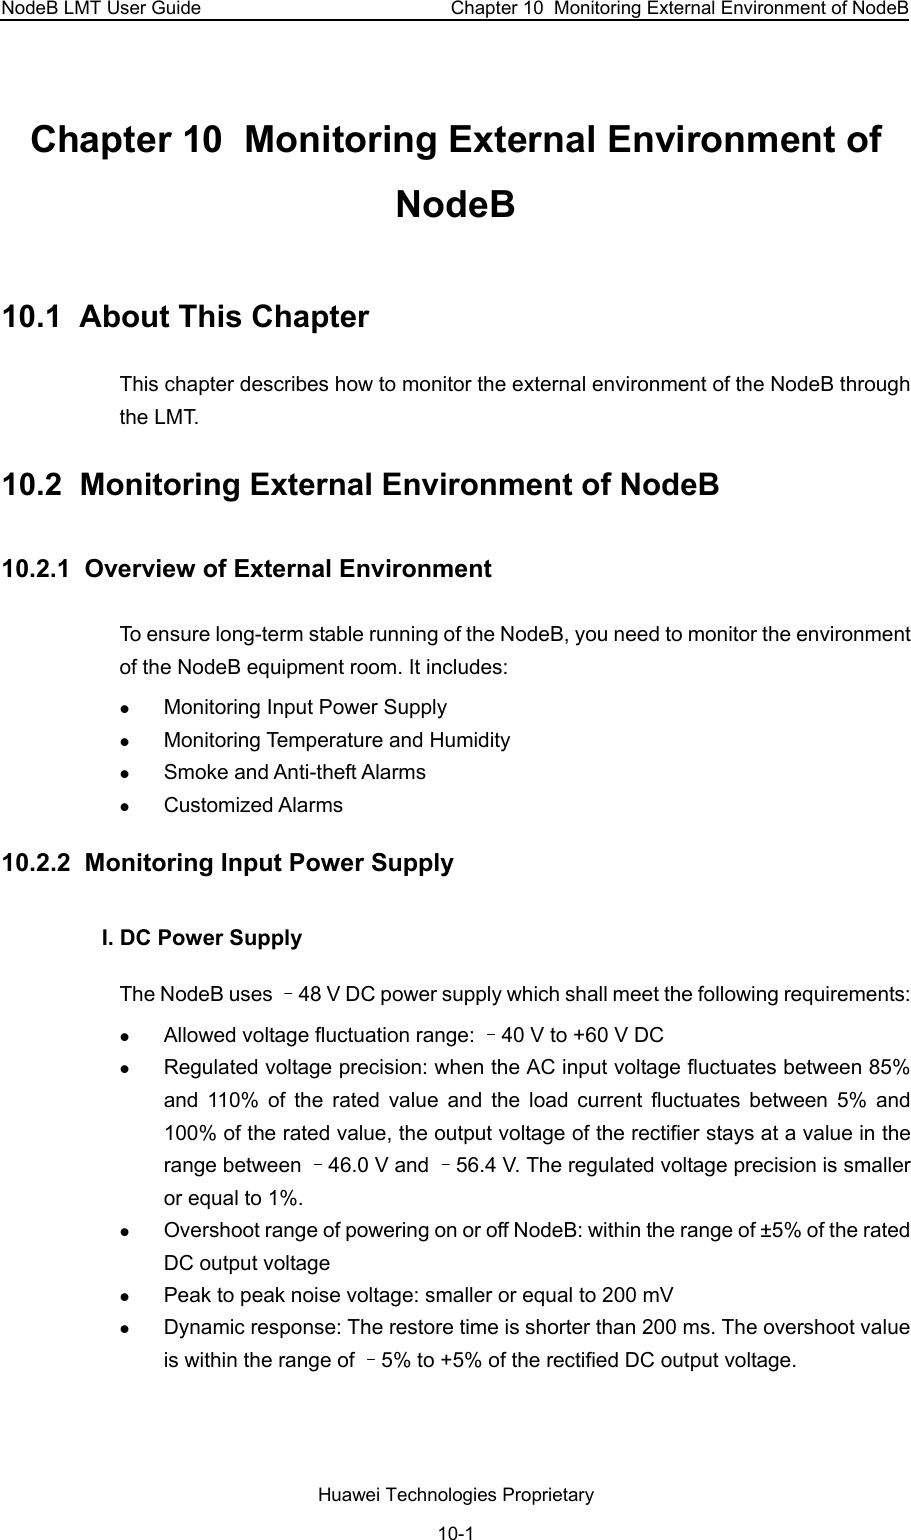 NodeB LMT User Guide  Chapter 10  Monitoring External Environment of NodeB Chapter 10  Monitoring External Environment of NodeB 10.1  About This Chapter This chapter describes how to monitor the external environment of the NodeB through the LMT.  10.2  Monitoring External Environment of NodeB 10.2.1  Overview of External Environment To ensure long-term stable running of the NodeB, you need to monitor the environment of the NodeB equipment room. It includes:  z Monitoring Input Power Supply  z Monitoring Temperature and Humidity  z Smoke and Anti-theft Alarms z Customized Alarms 10.2.2  Monitoring Input Power Supply  I. DC Power Supply The NodeB uses –48 V DC power supply which shall meet the following requirements:  z Allowed voltage fluctuation range: –40 V to +60 V DC  z Regulated voltage precision: when the AC input voltage fluctuates between 85% and 110% of the rated value and the load current fluctuates between 5% and 100% of the rated value, the output voltage of the rectifier stays at a value in the range between –46.0 V and –56.4 V. The regulated voltage precision is smaller or equal to 1%. z Overshoot range of powering on or off NodeB: within the range of ±5% of the rated DC output voltage  z Peak to peak noise voltage: smaller or equal to 200 mV z Dynamic response: The restore time is shorter than 200 ms. The overshoot value is within the range of –5% to +5% of the rectified DC output voltage. Huawei Technologies Proprietary 10-1 